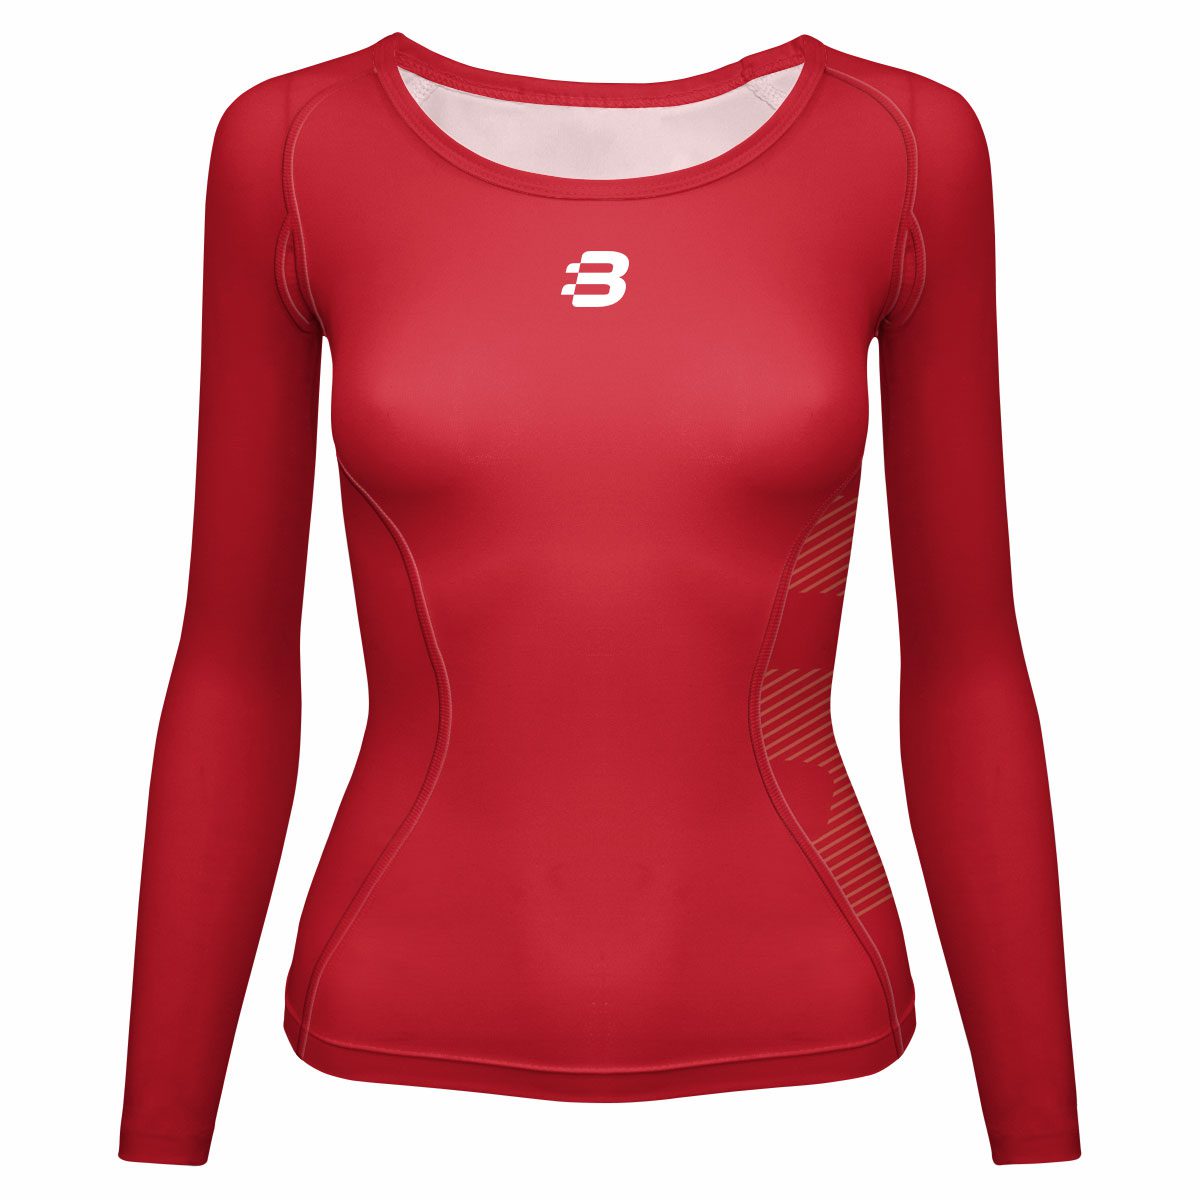 Women's Compression Long Sleeve Top - Red - Blackchrome